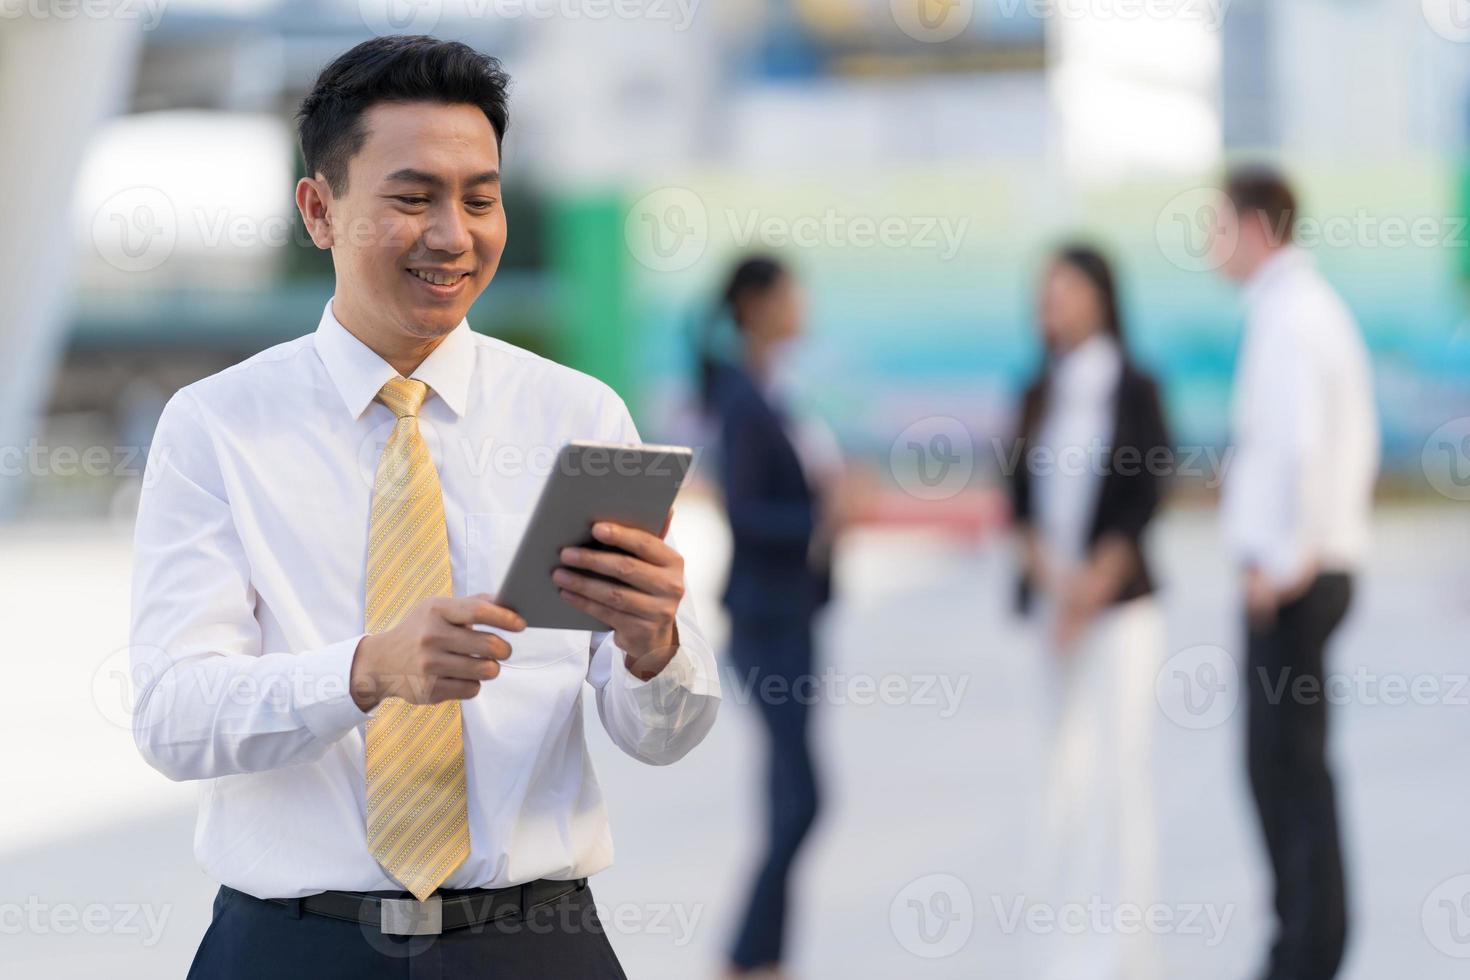 Portrait of smiling businessman looking at tablet photo